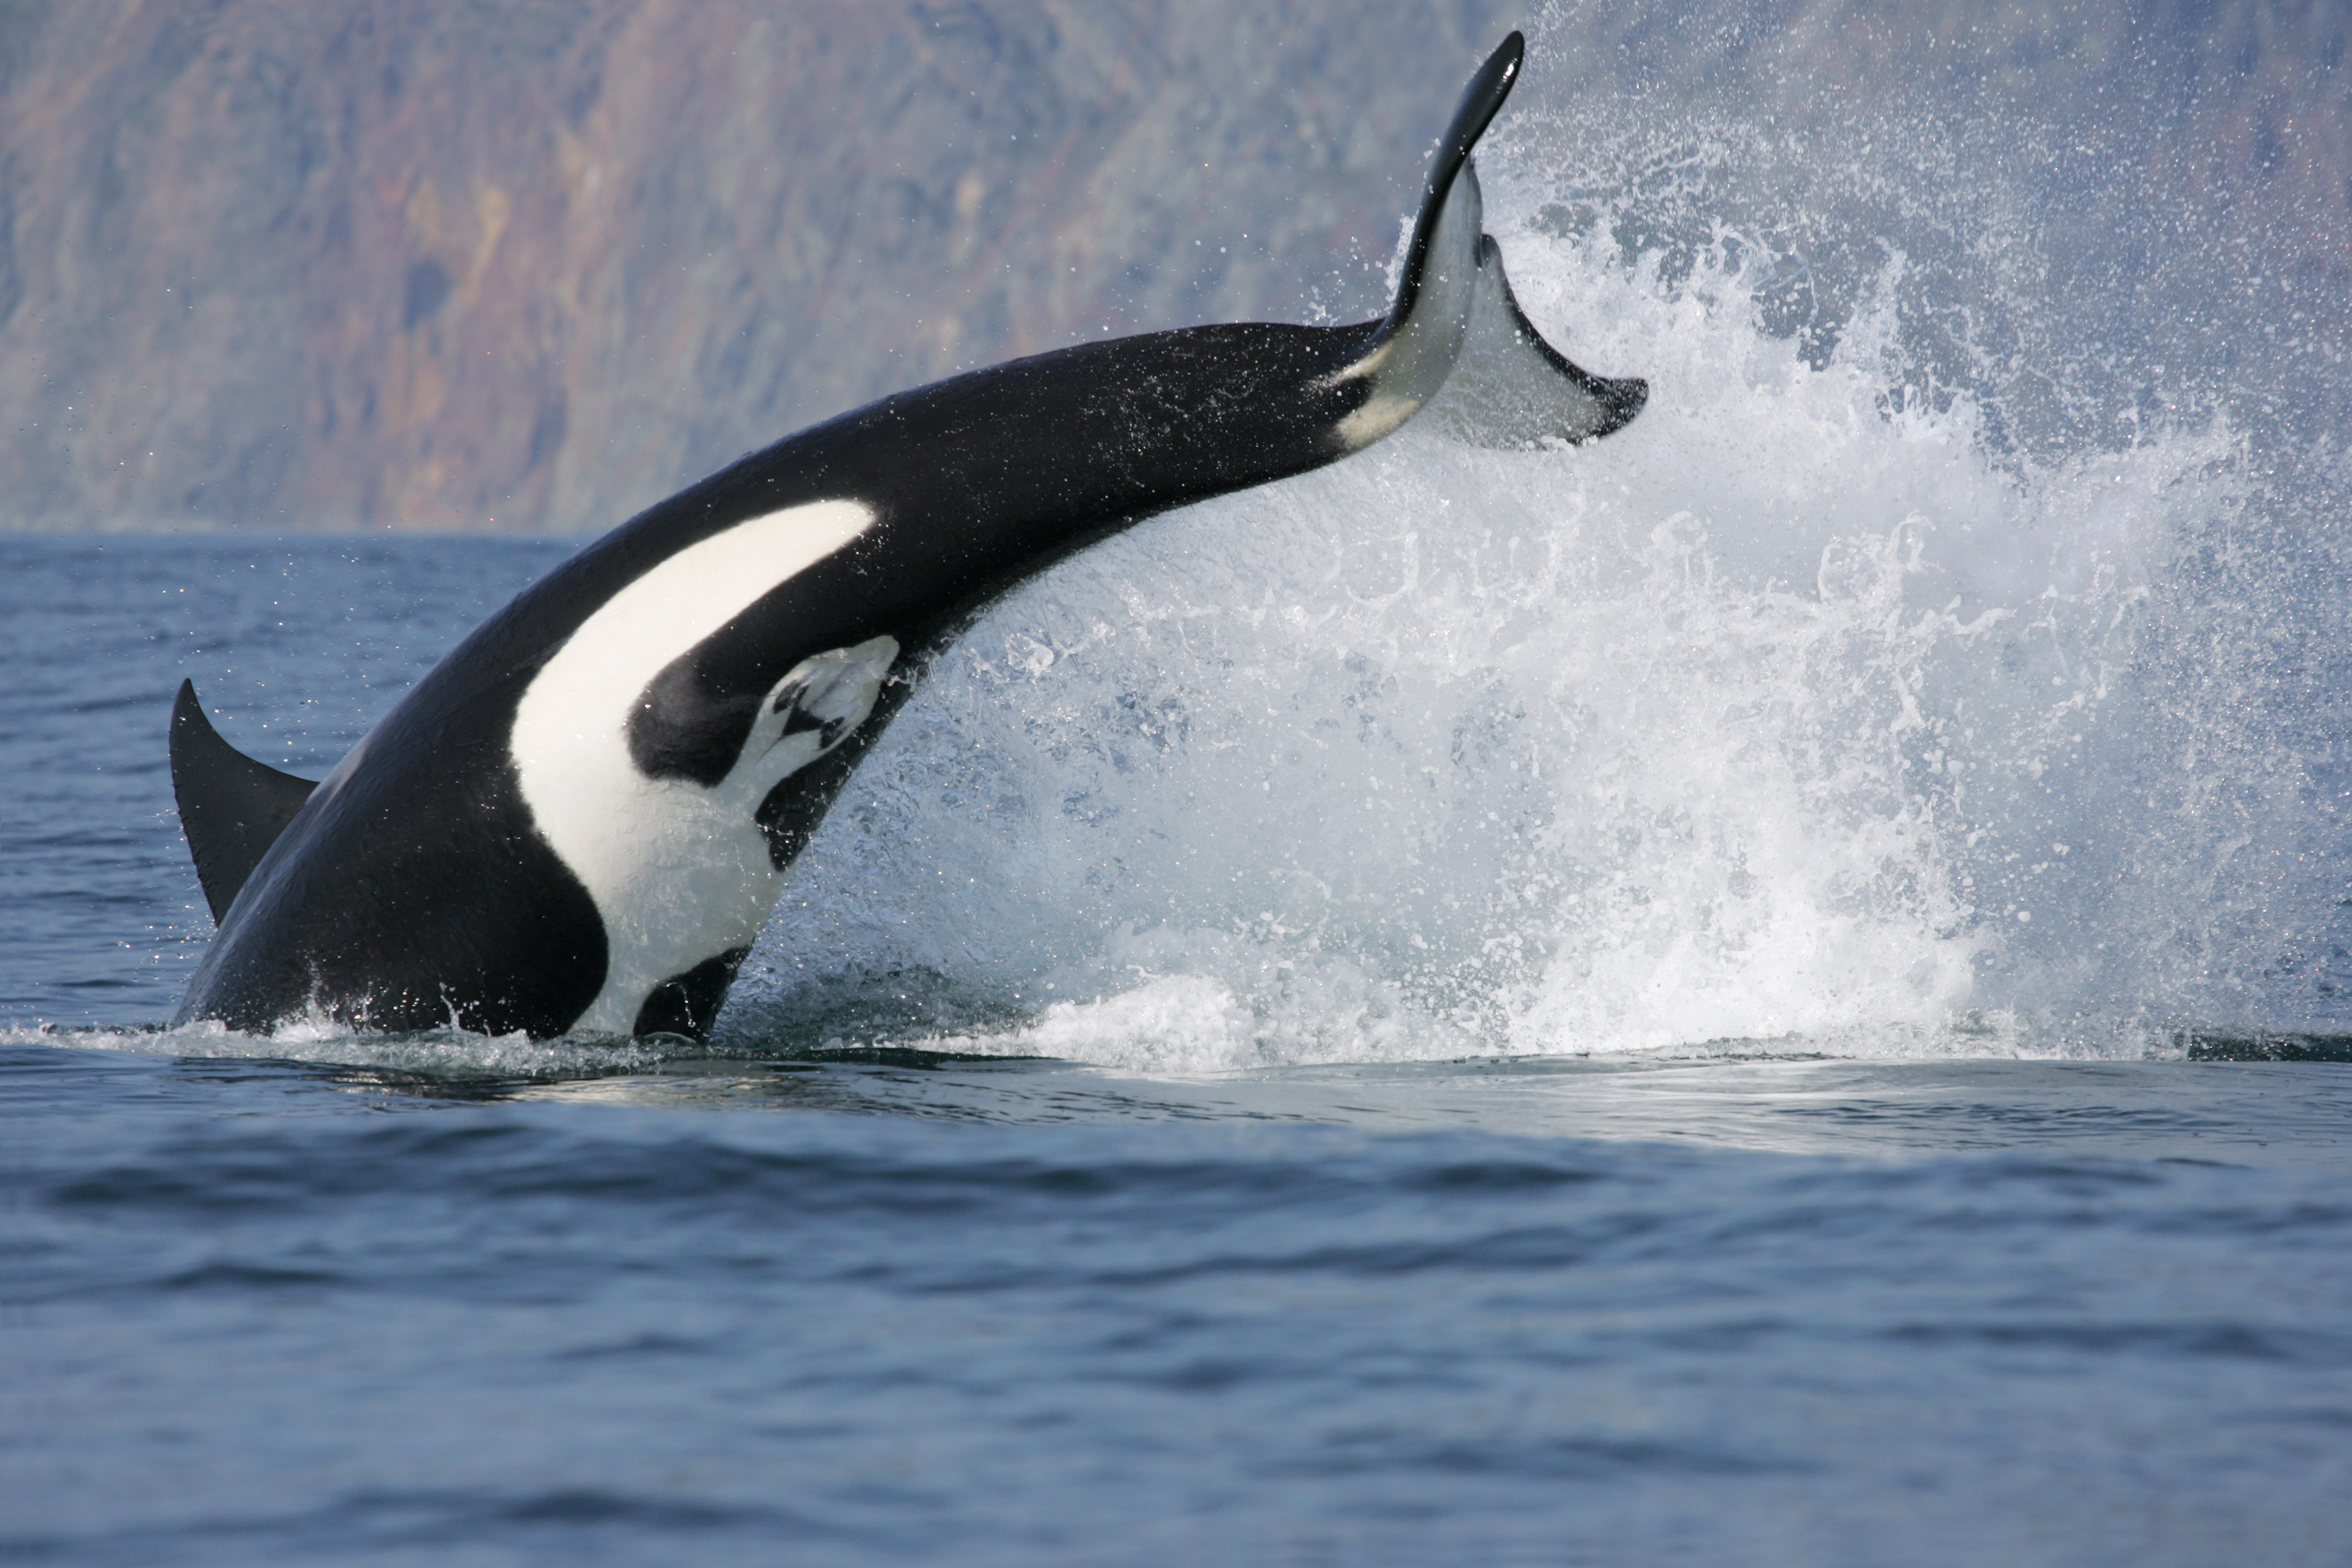 Killer whale, or orca, breaching in the Russian Far East, site of the Commander Islands State Biosphere Reserve, proposed for expansion. The IUCN Red List status of the killer whale is Data Deficient.  Credit: © 2011 Tatiana Ivkovich (Russian Cetacean...